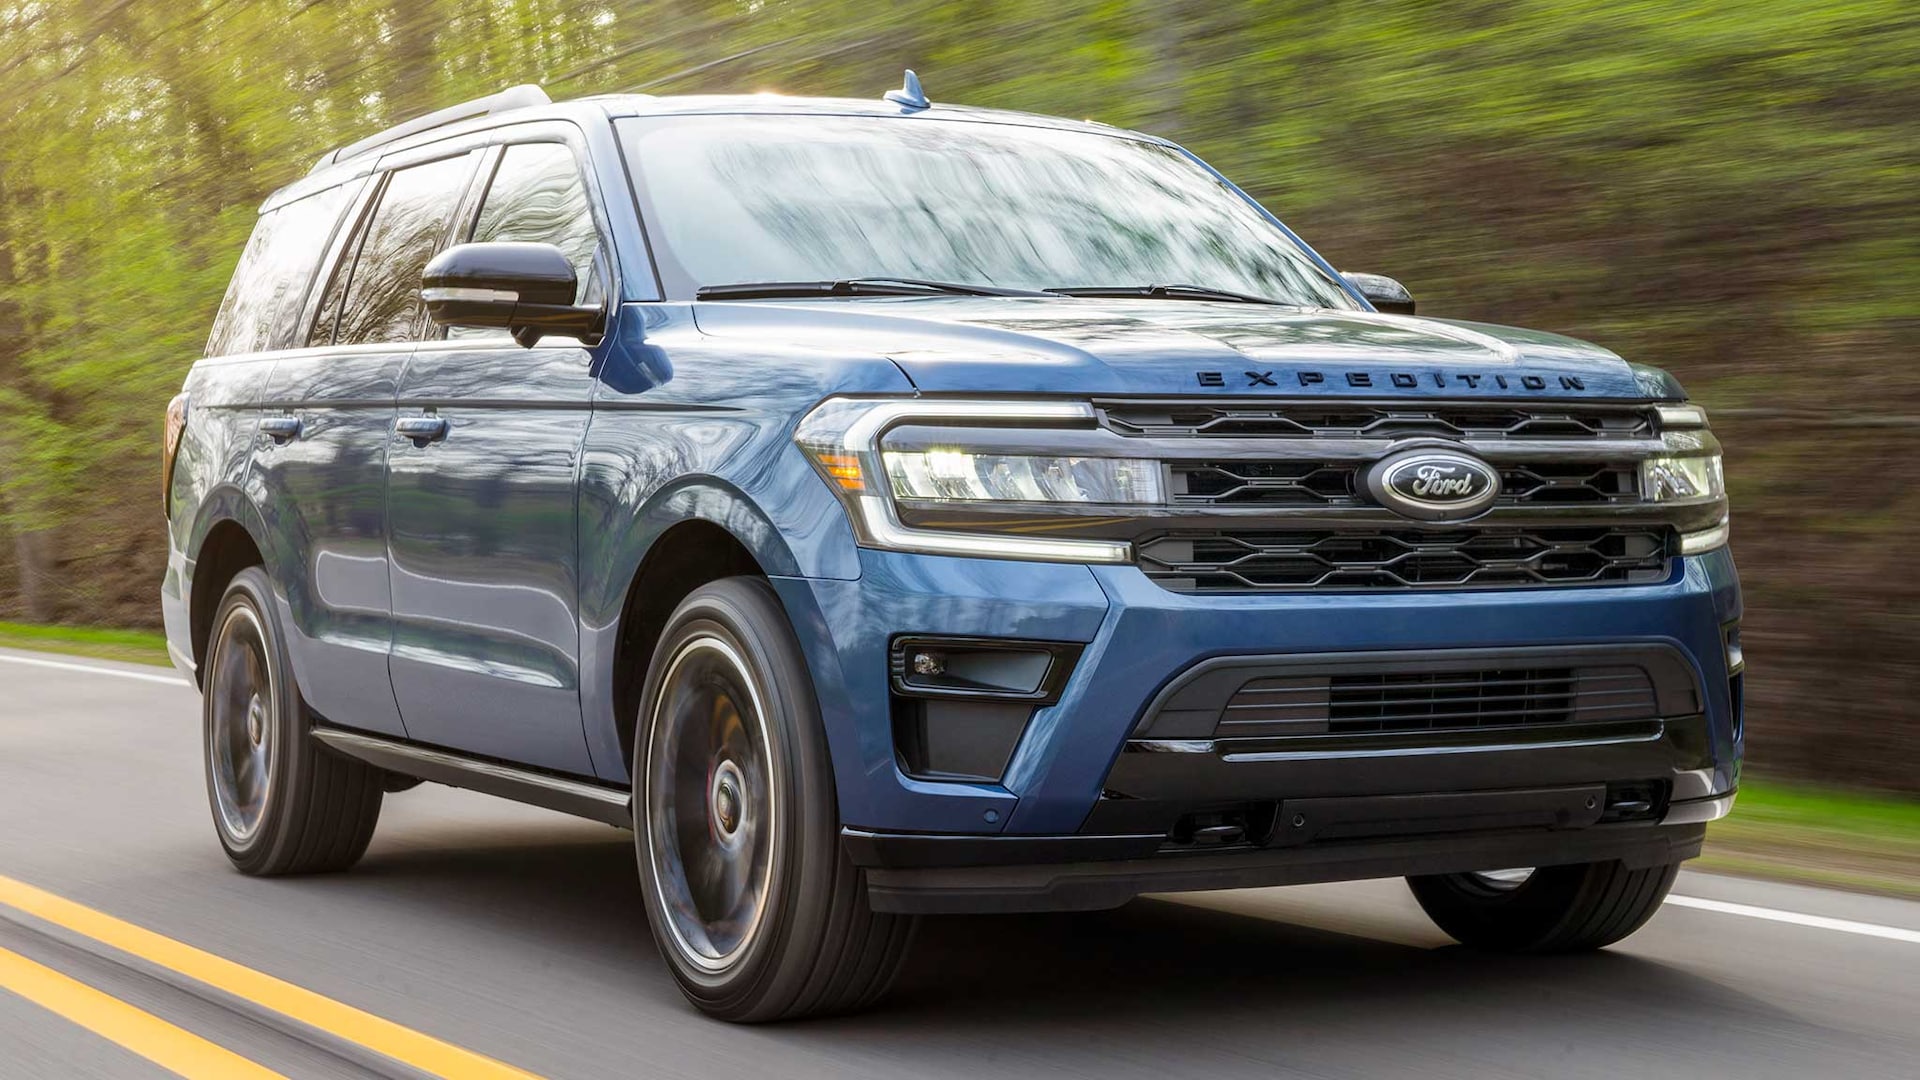 2022 Ford Expedition First Drive: The Full-Size SUV Expands Its Focus